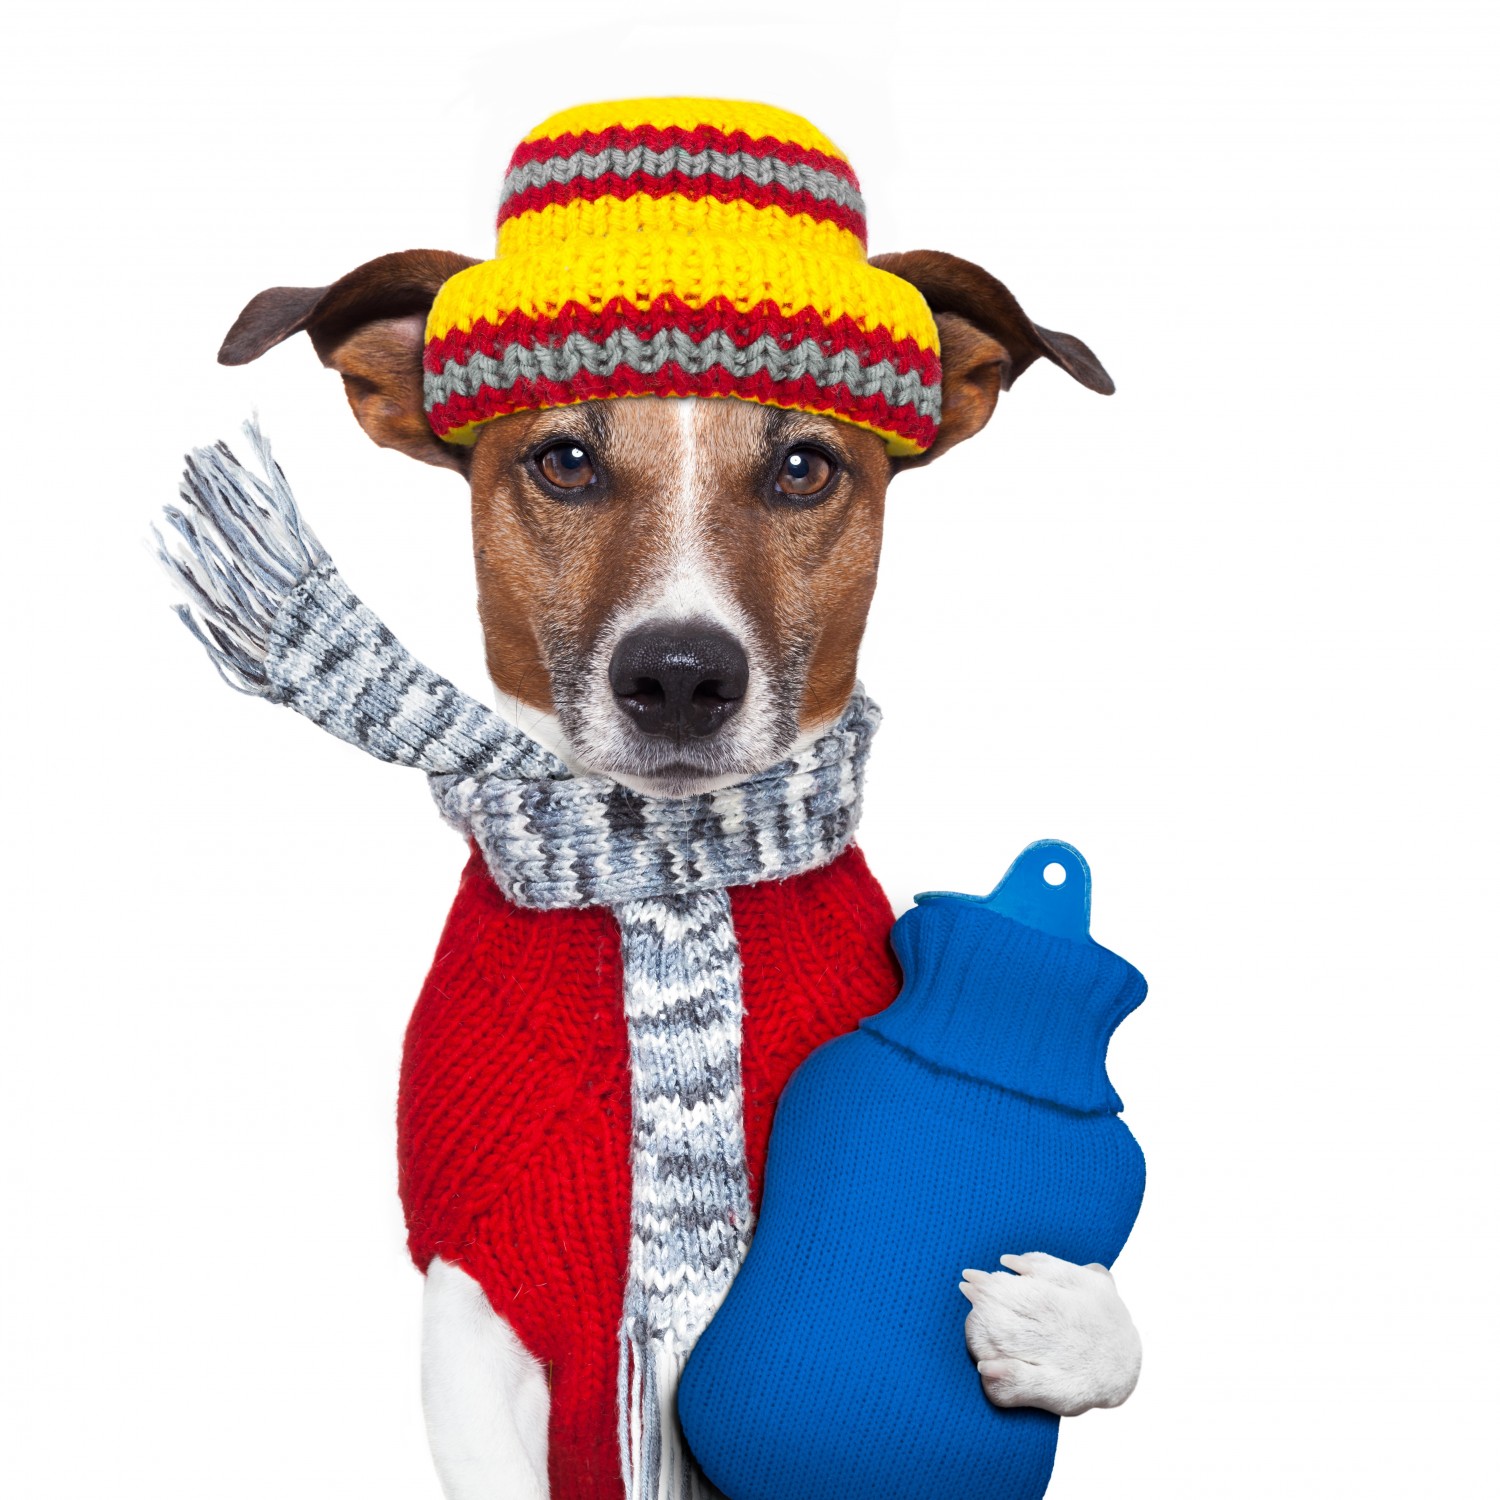 Dog in warm outfit